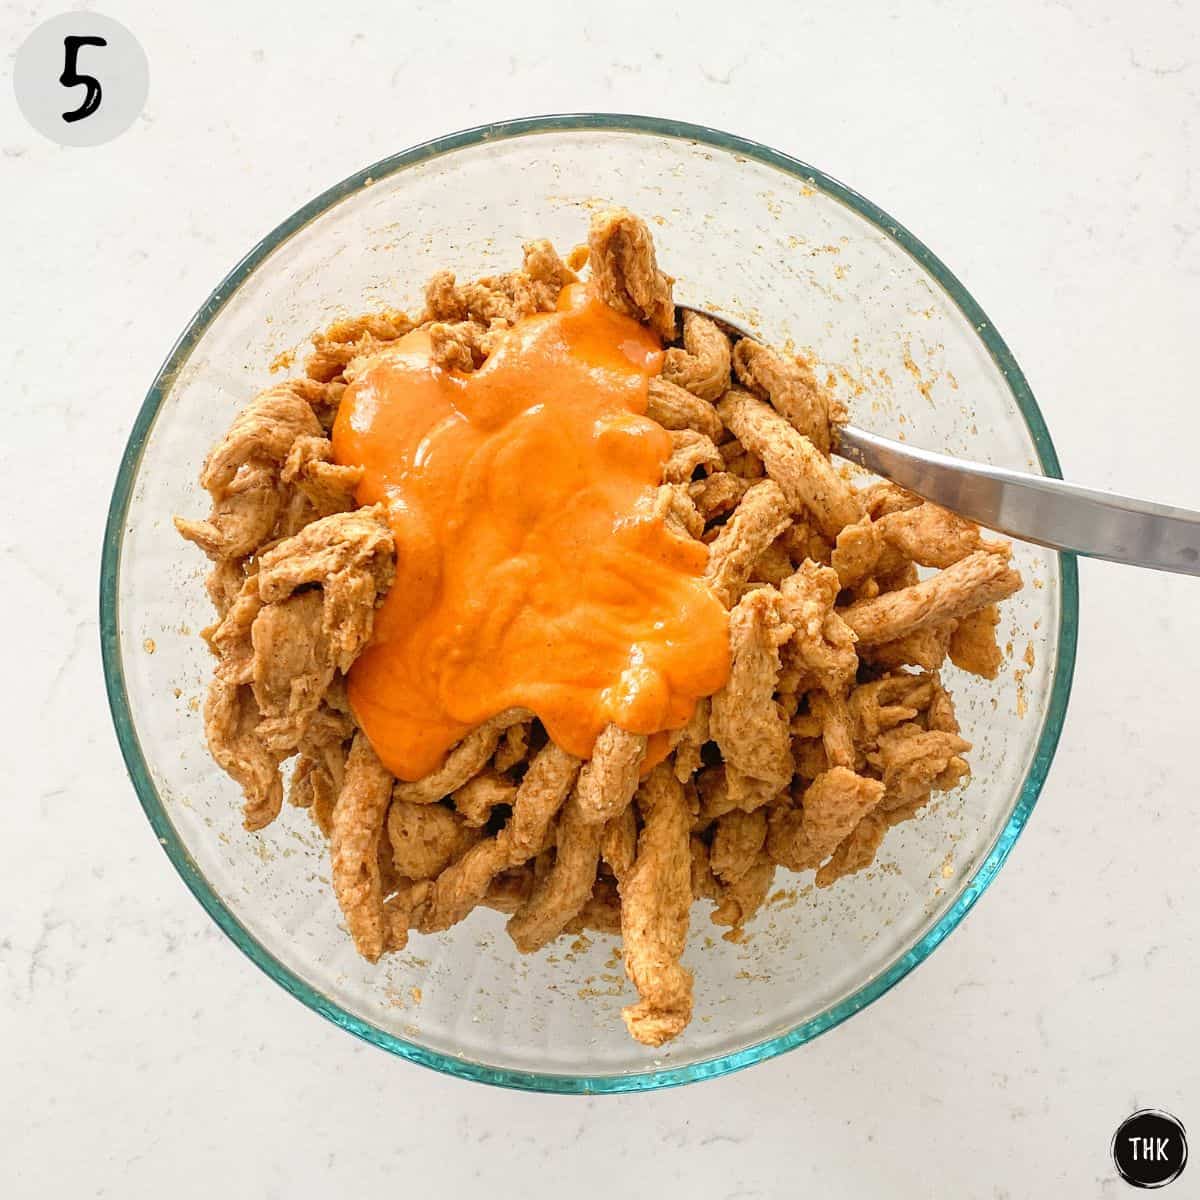 Buffalo sauce sitting on top of bowl of soy curls.